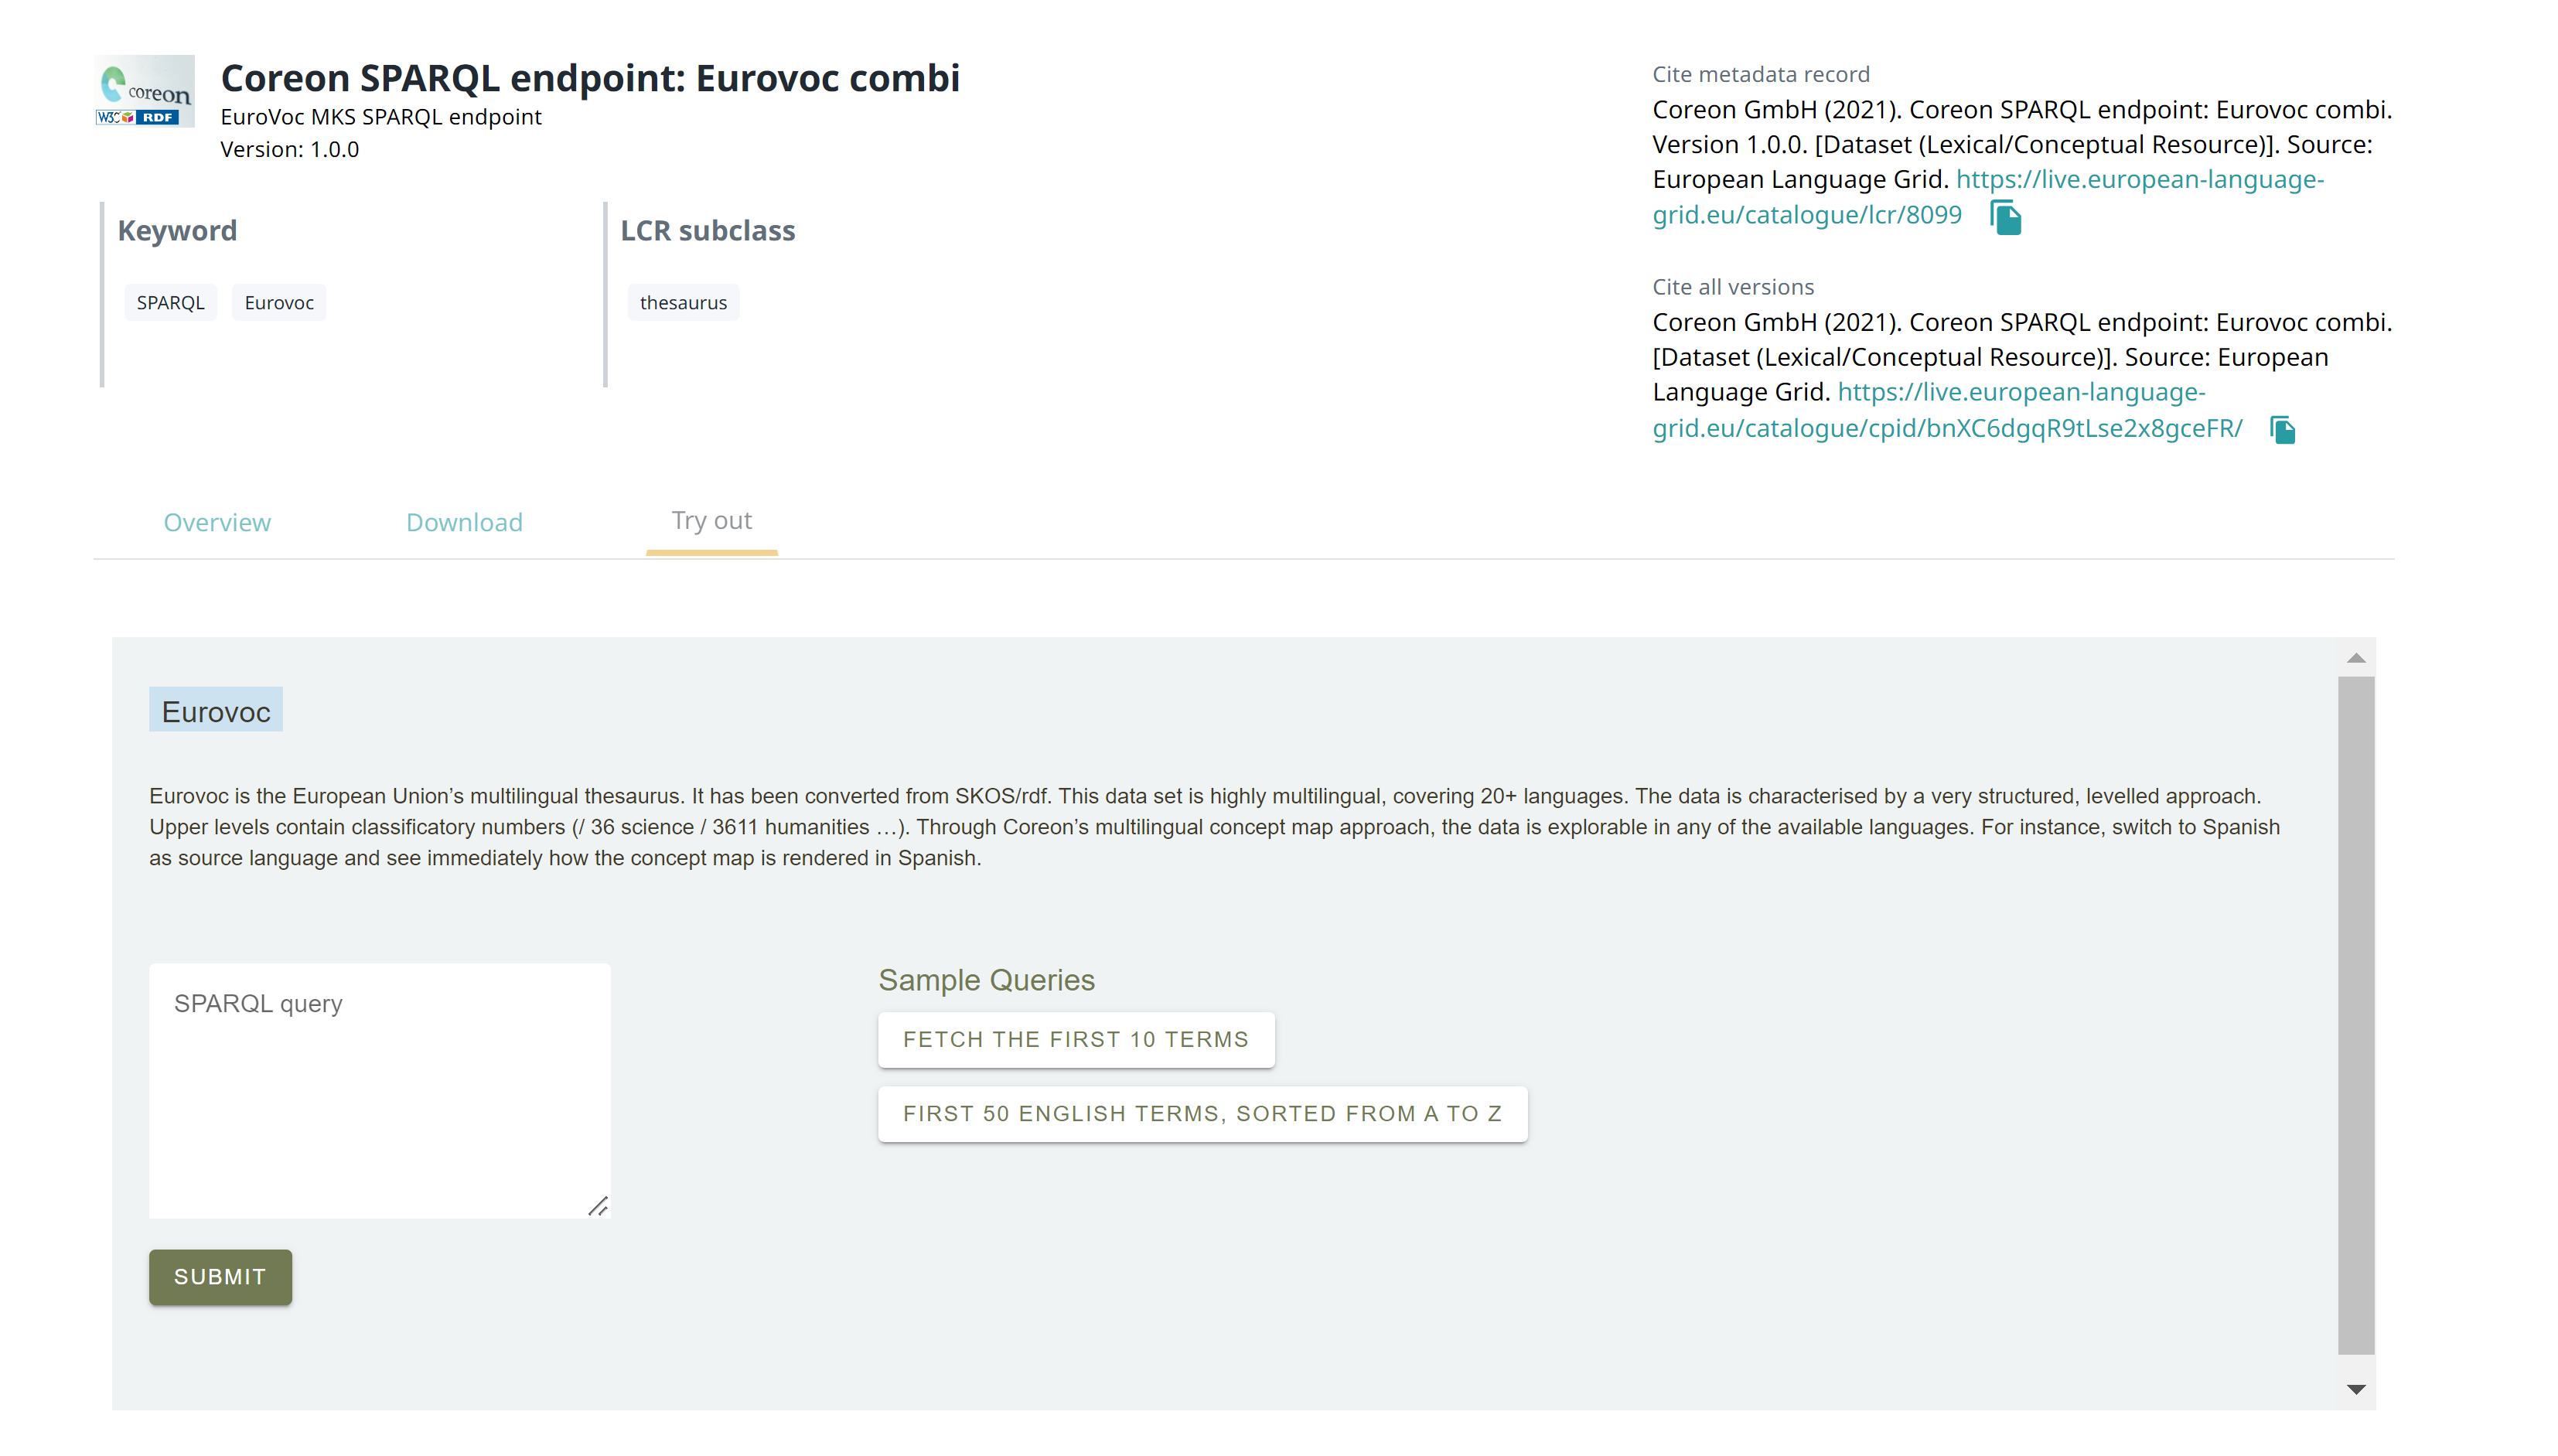 View page of a resource accessible via a SPARQL endpoint